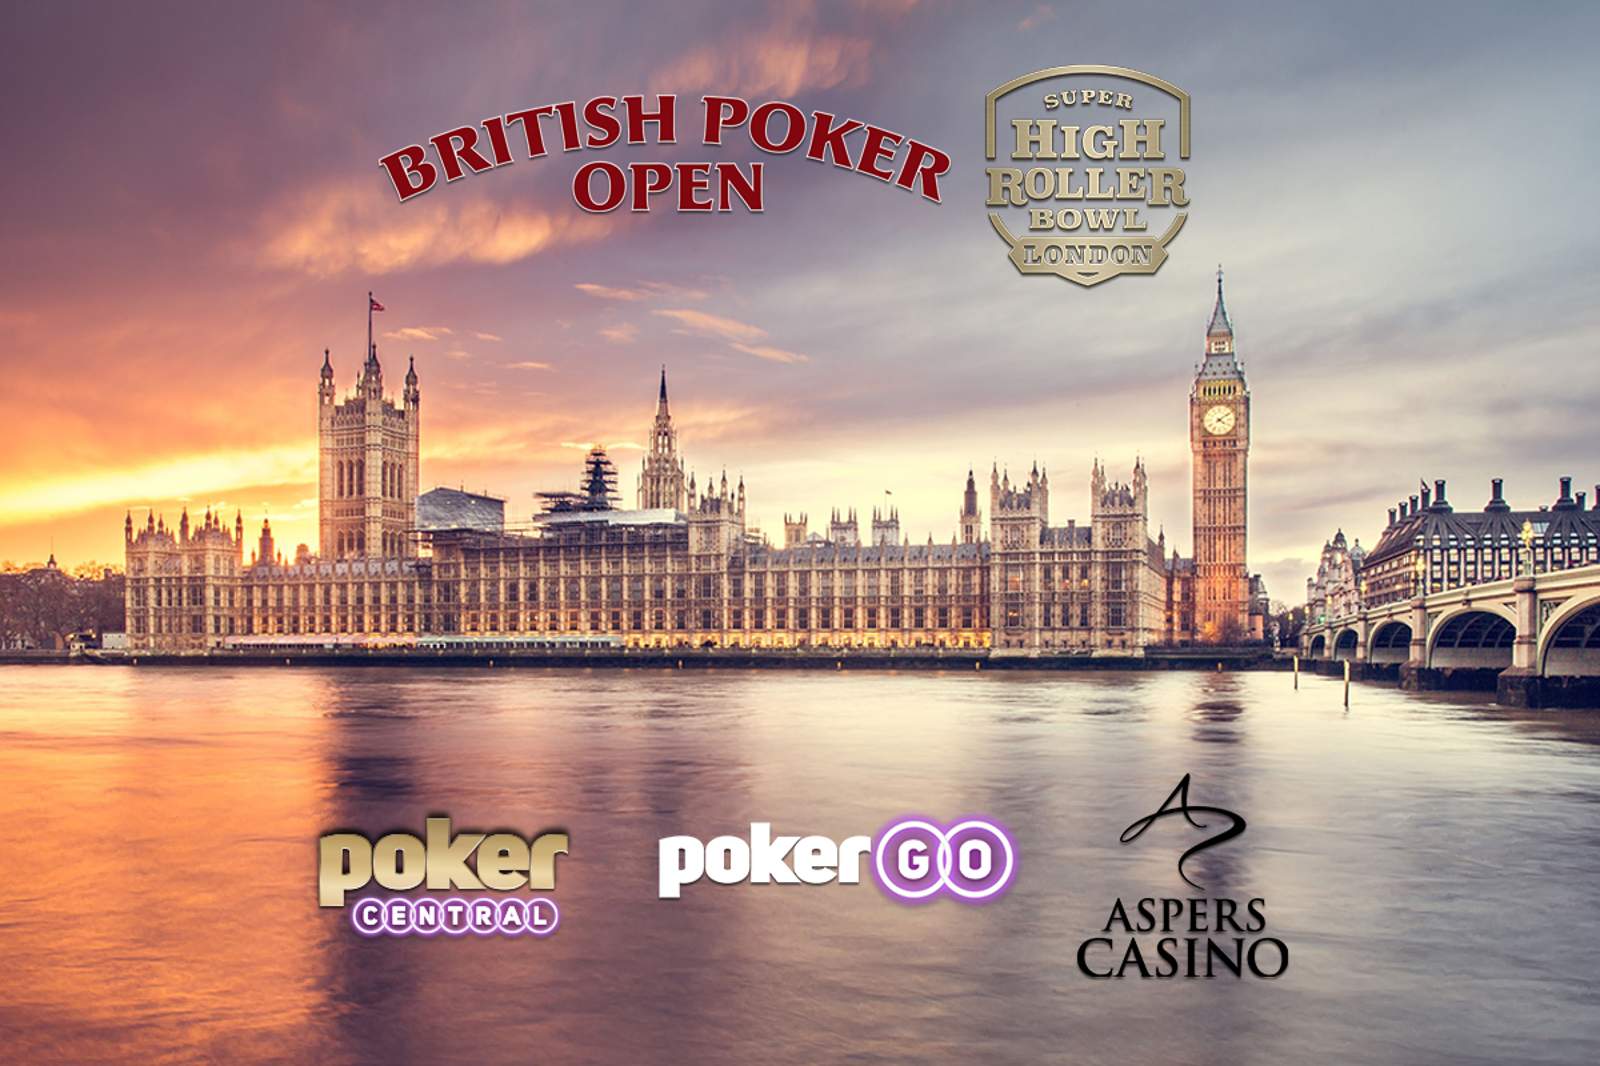 Poker Central Expands Poker Majors to Europe with British Poker Open and Super High Roller Bowl London